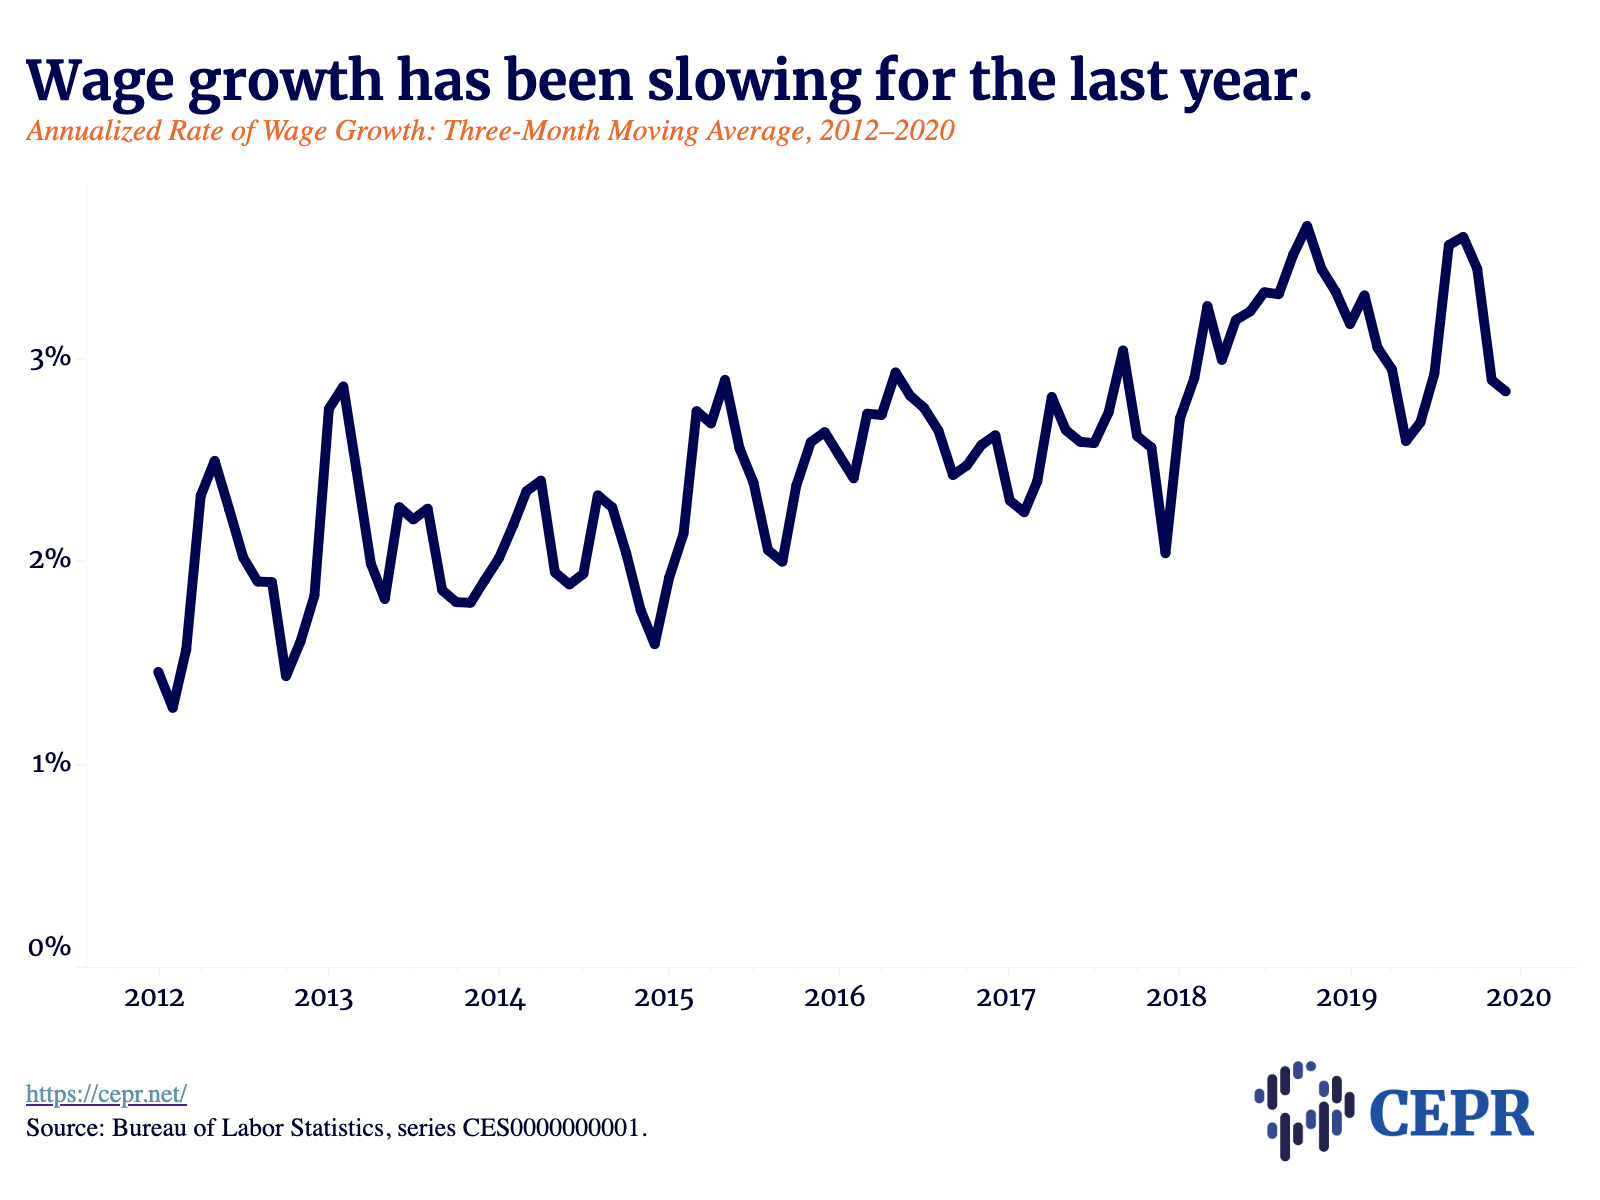 Wage Growth Has Been Slwoing For the Past Year